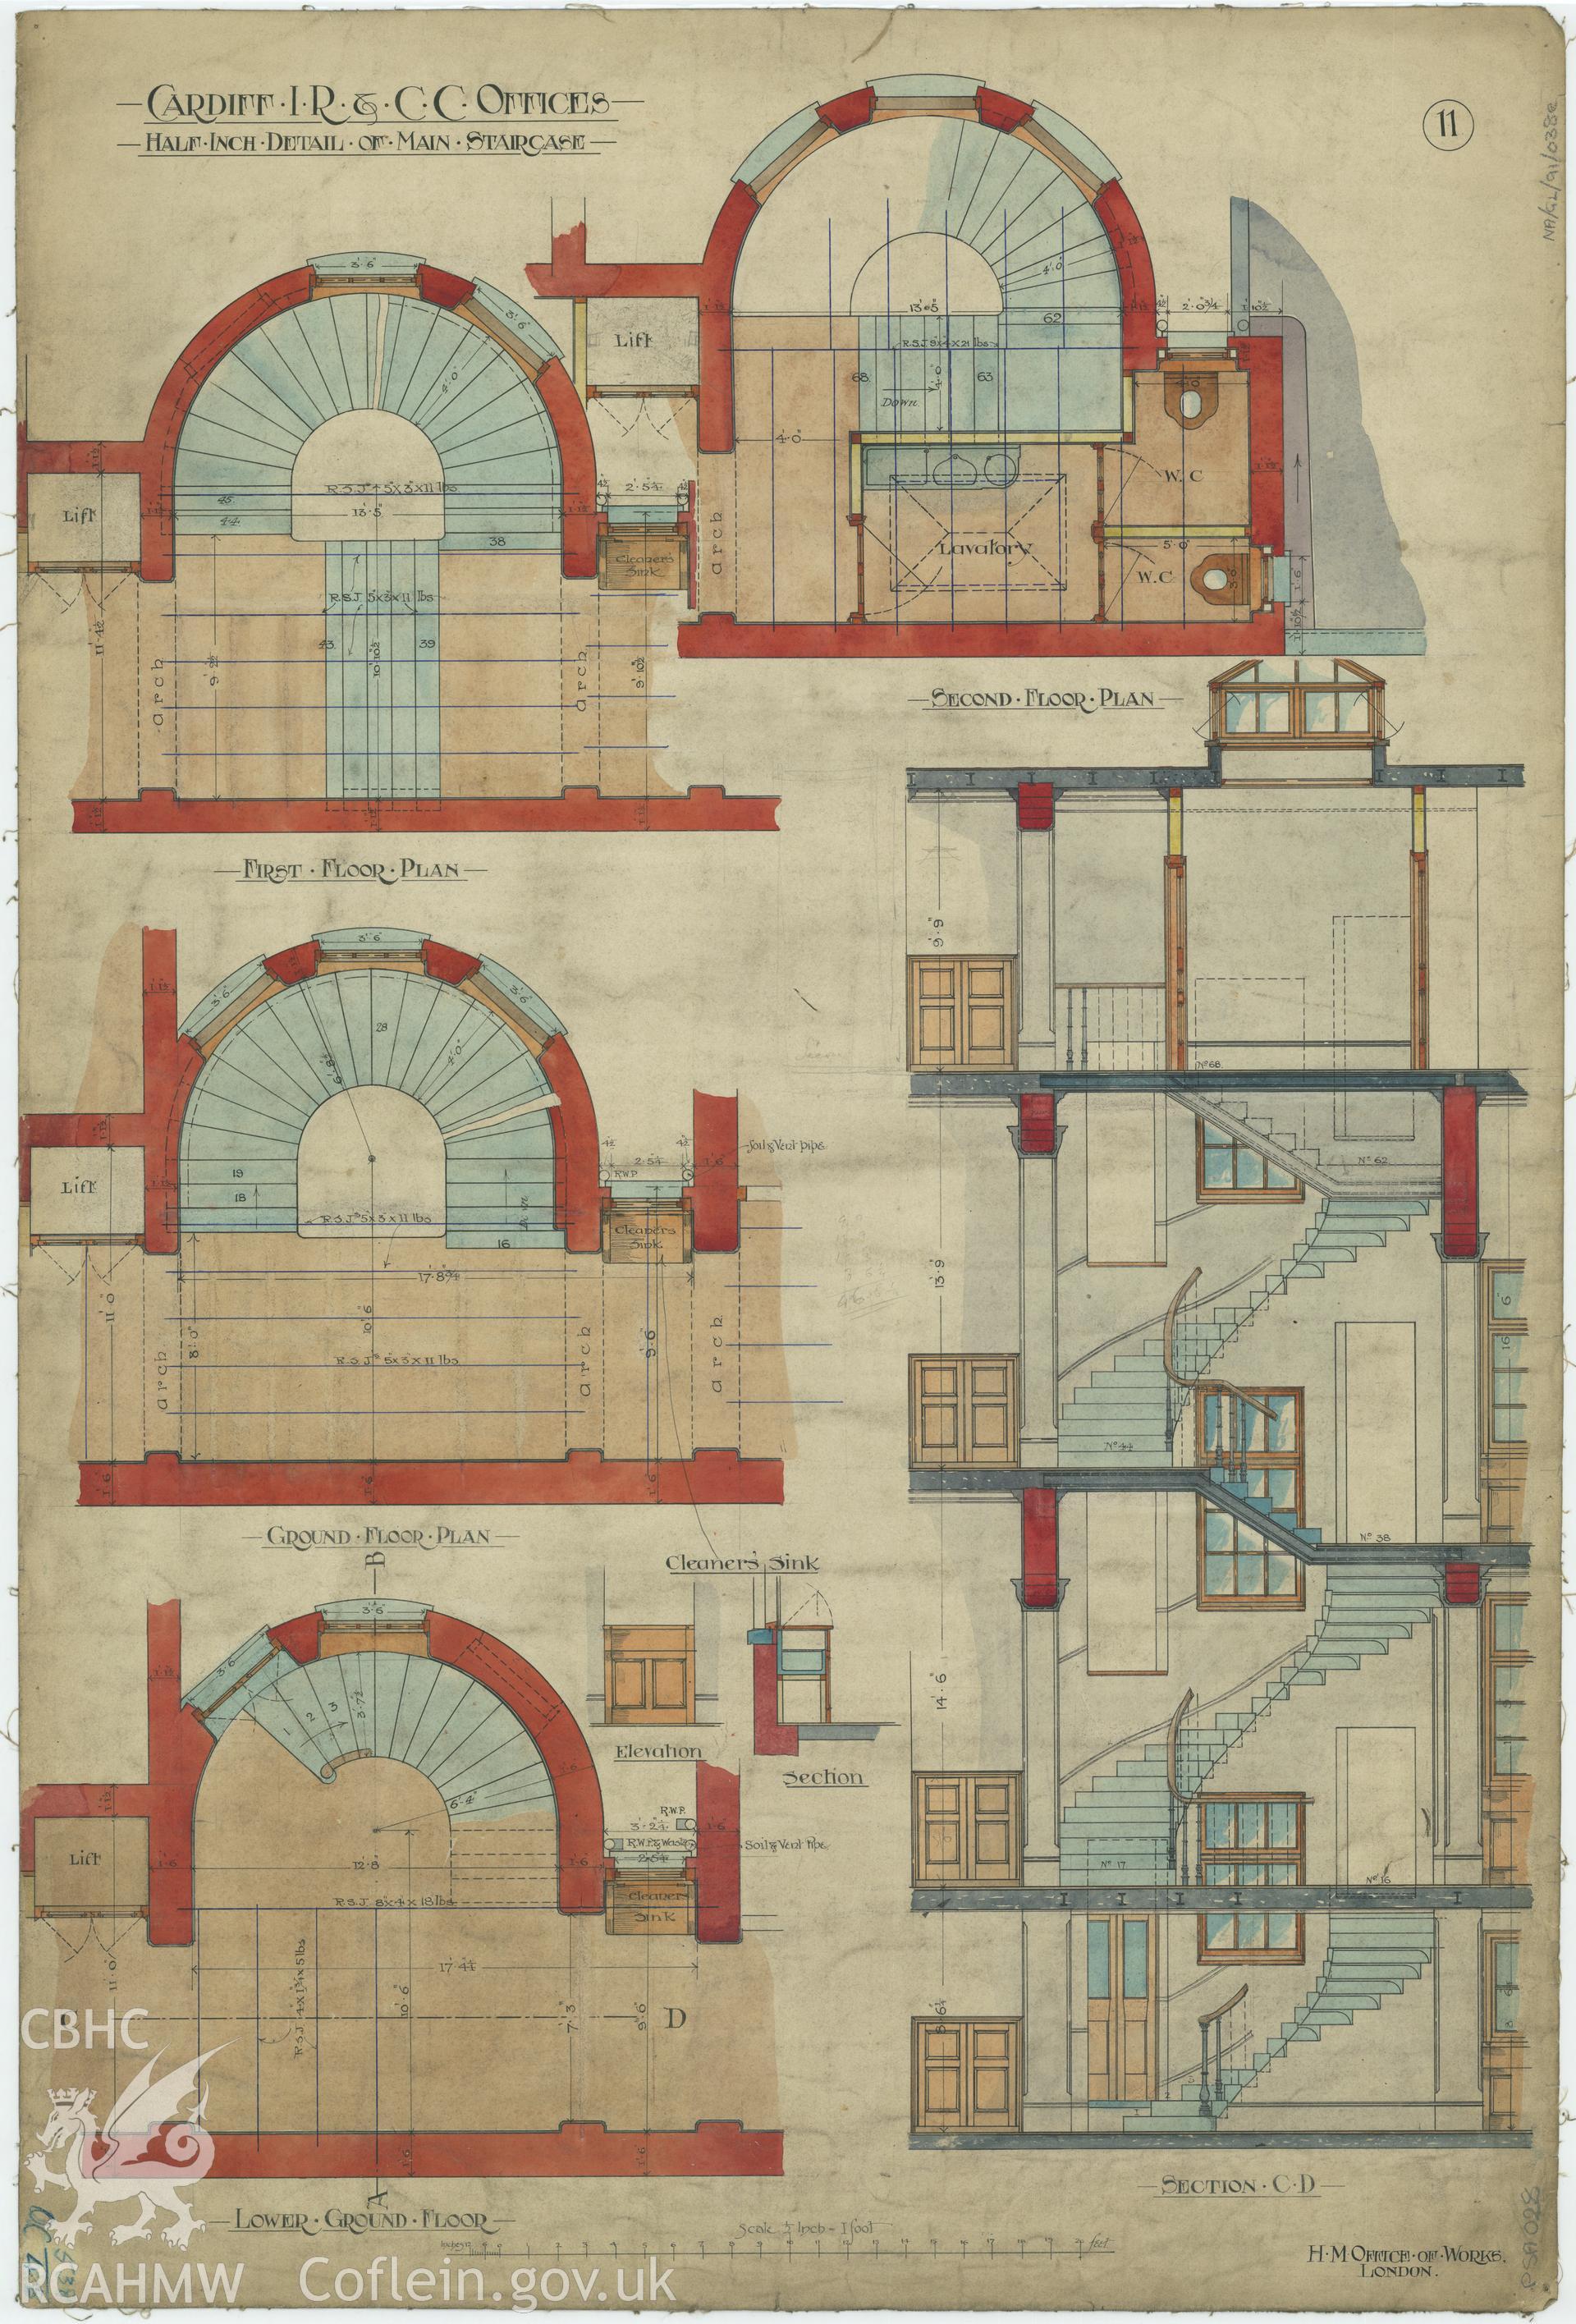 Digital copy of Cardiff Inland Revenue and County Court Offices; measured drawing showing detail of the main staircase, produced by H.M. Office of Works,  undated.